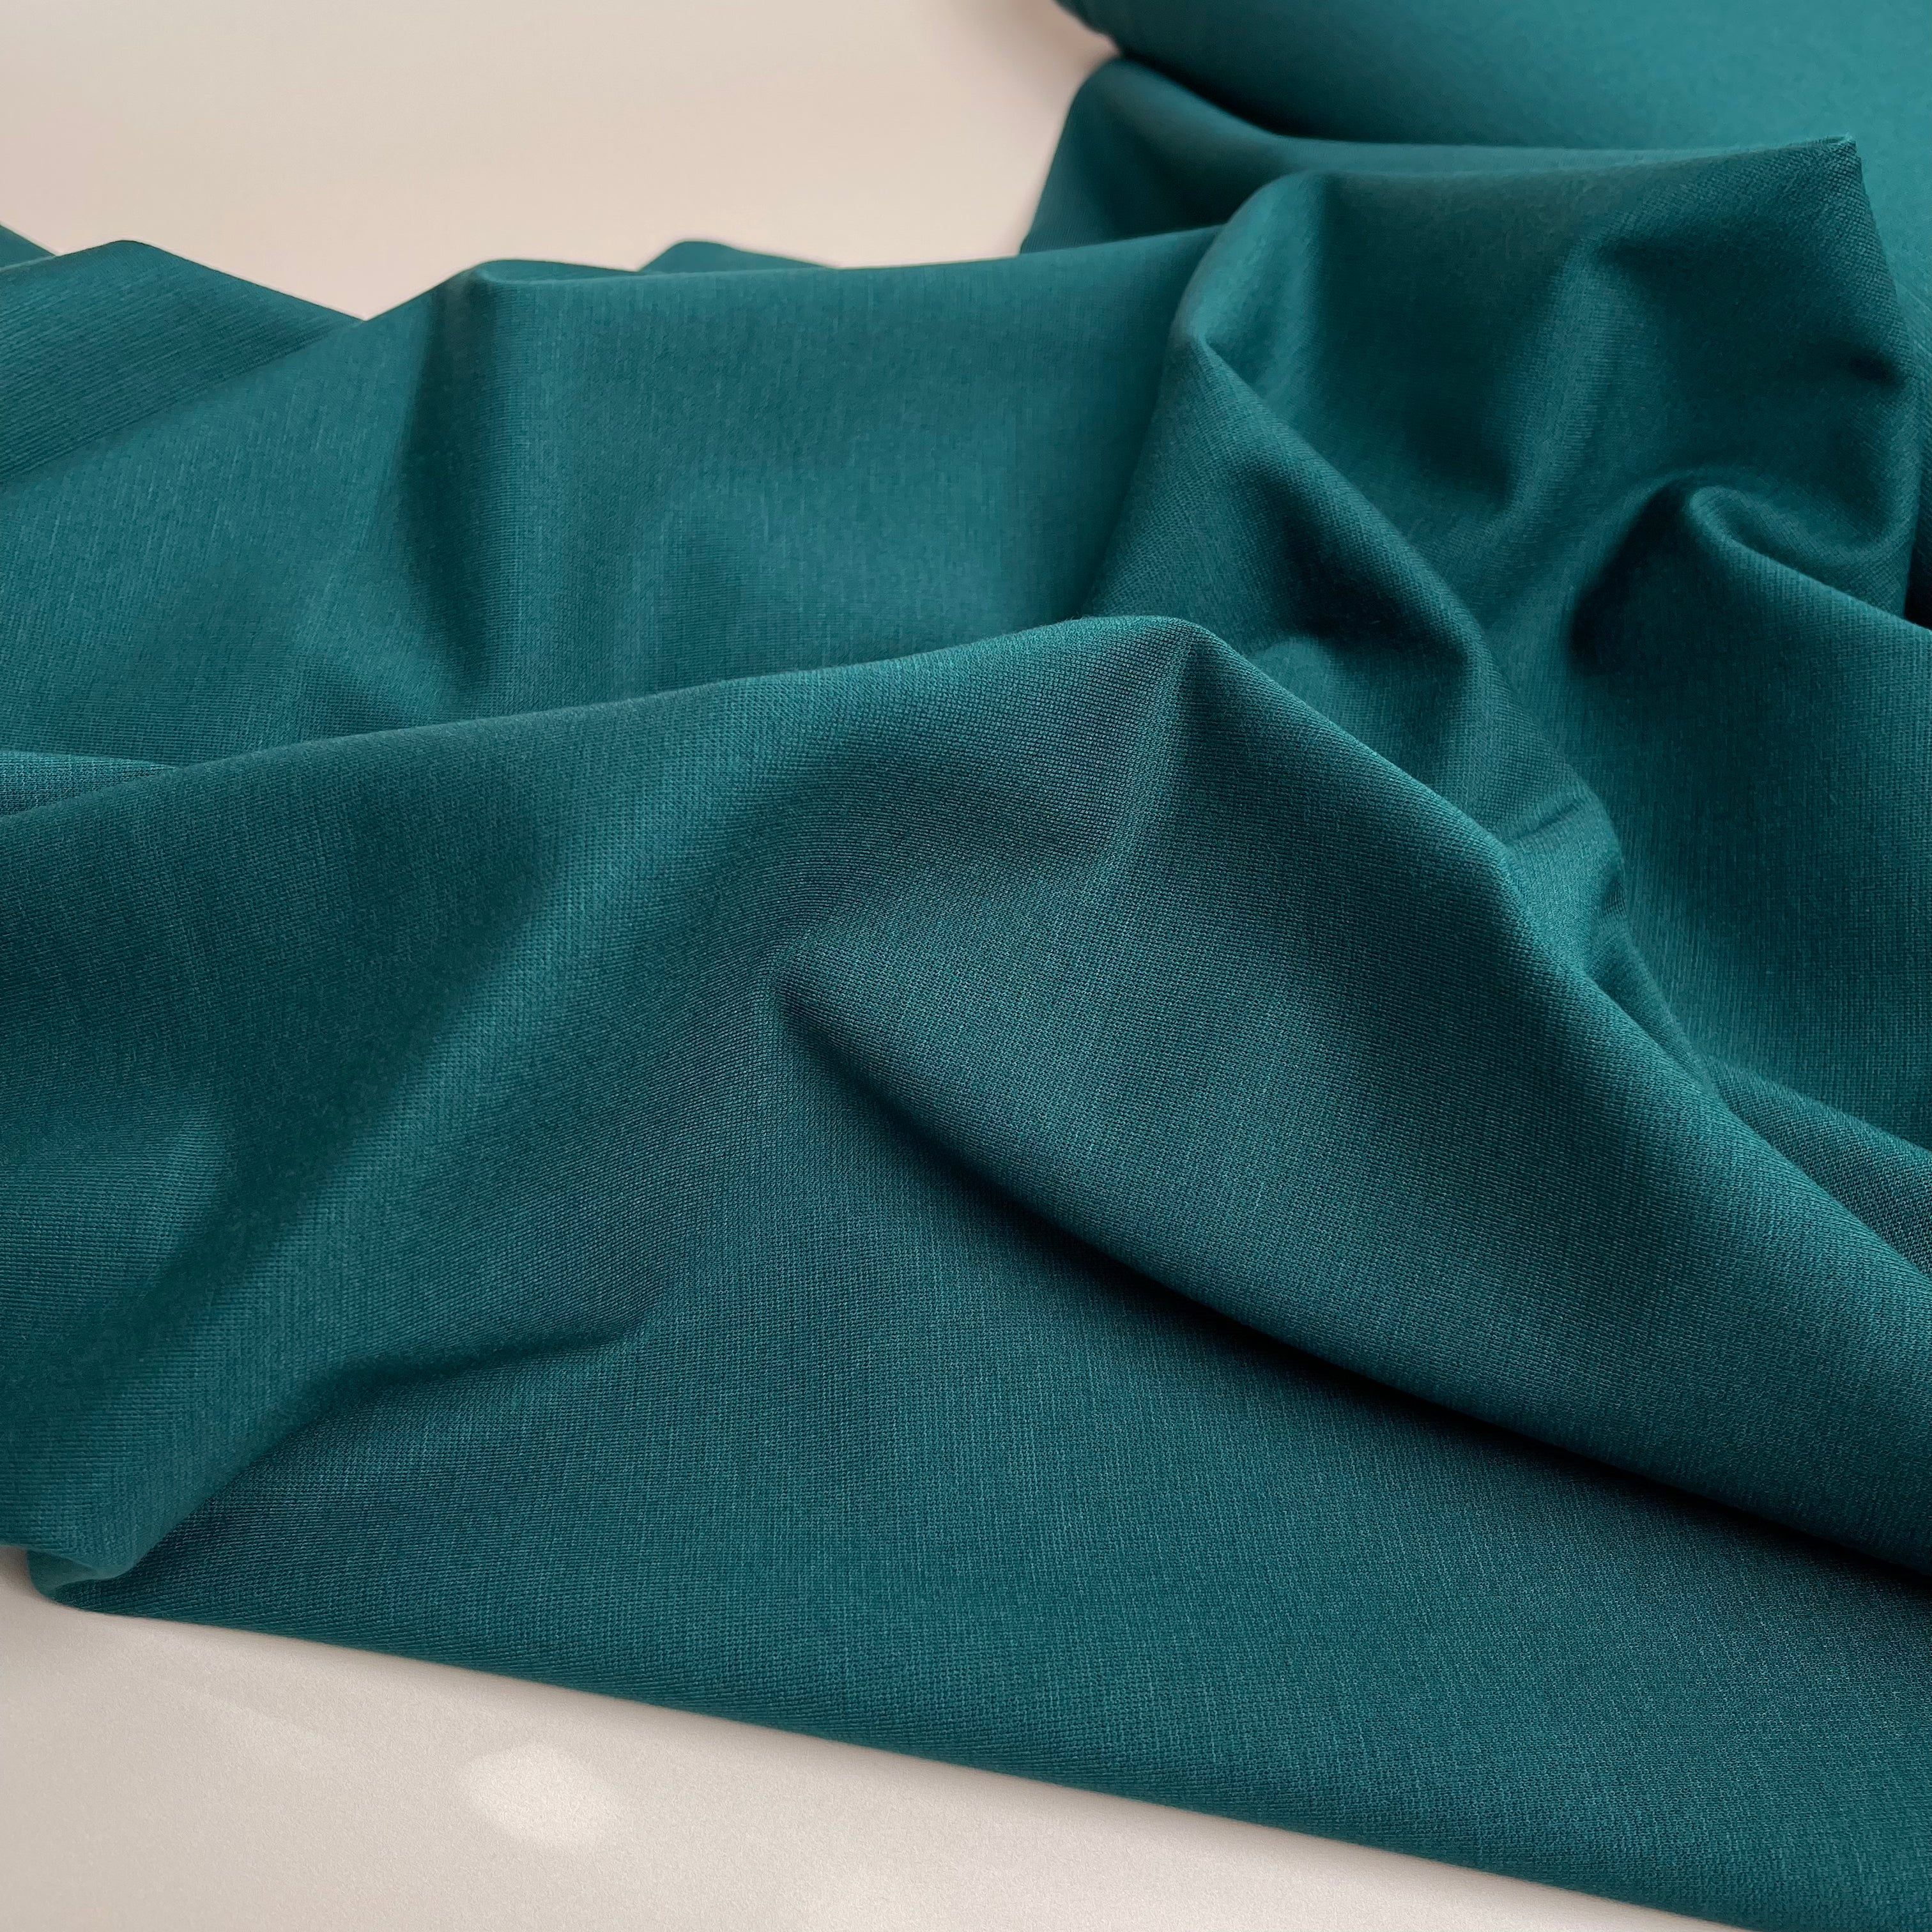 REMNANT 0.43 Metre - Forest Green Viscose Ponte Roma Double Knit Fabric